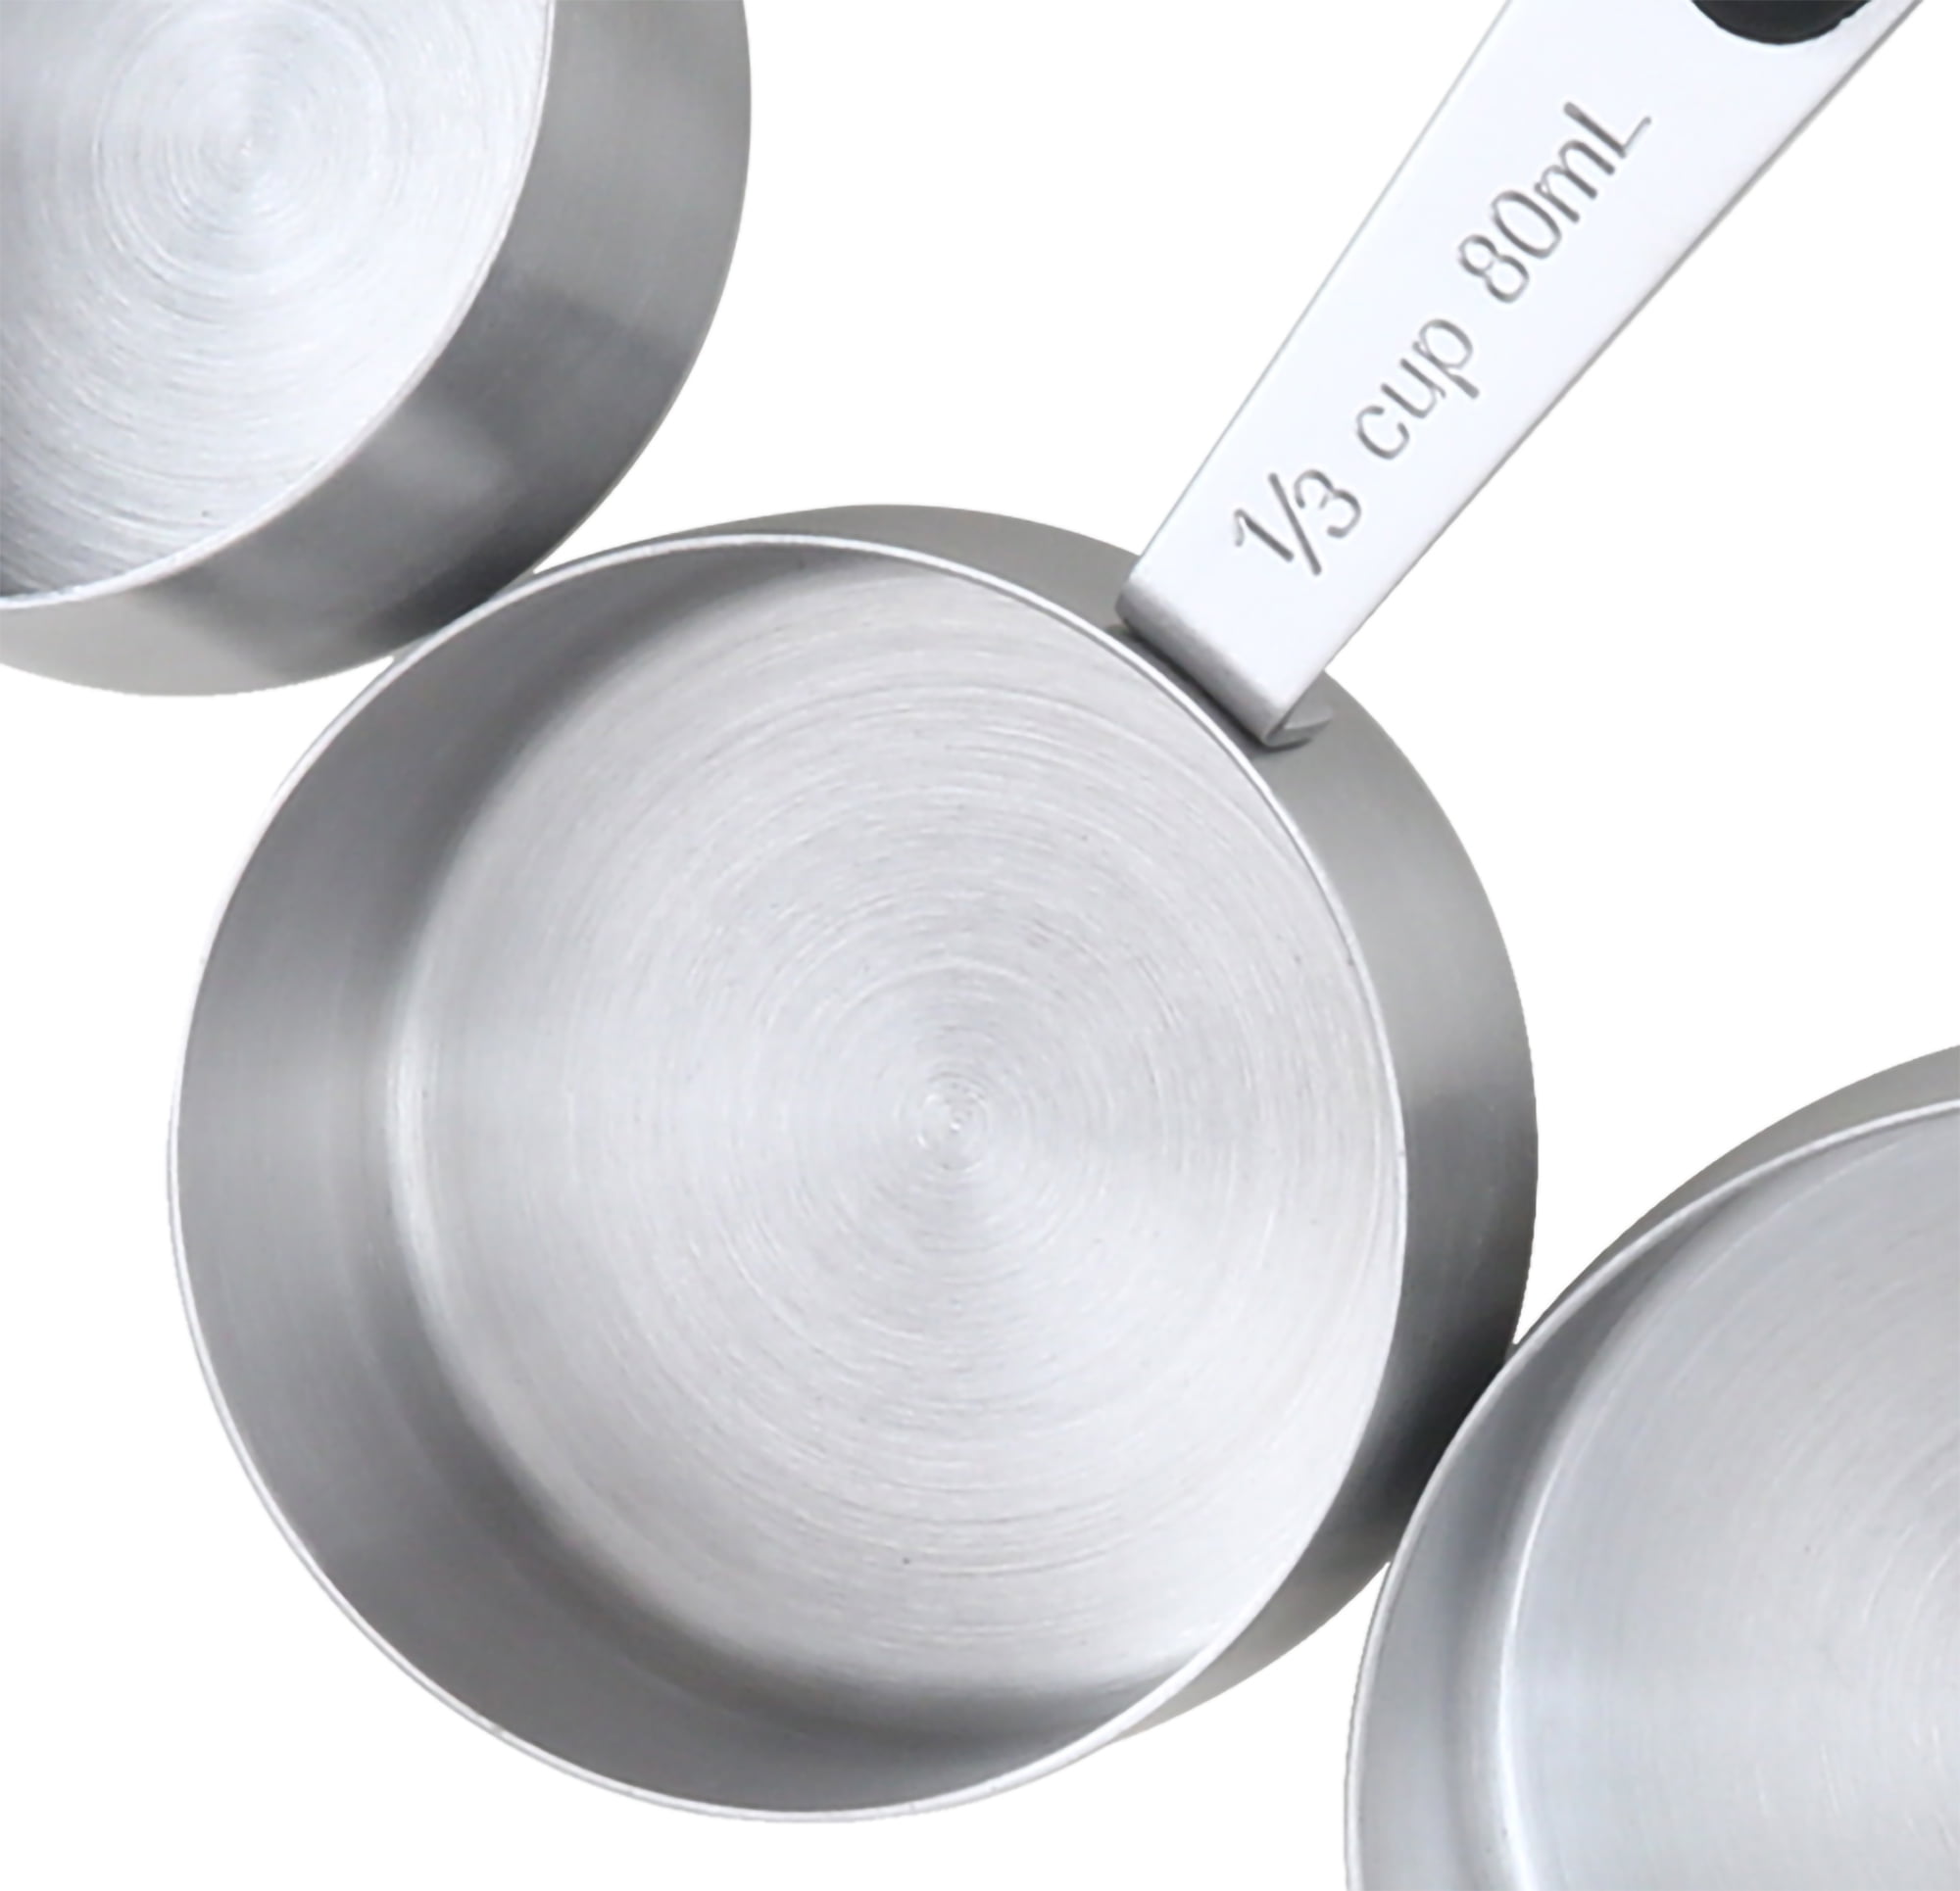 Mainstays 4-Piece Stainless Steel Measuring Cups Easy Grip Handles Silver, Size: 2.7 inch x 3.45 inch x 8.9 inch